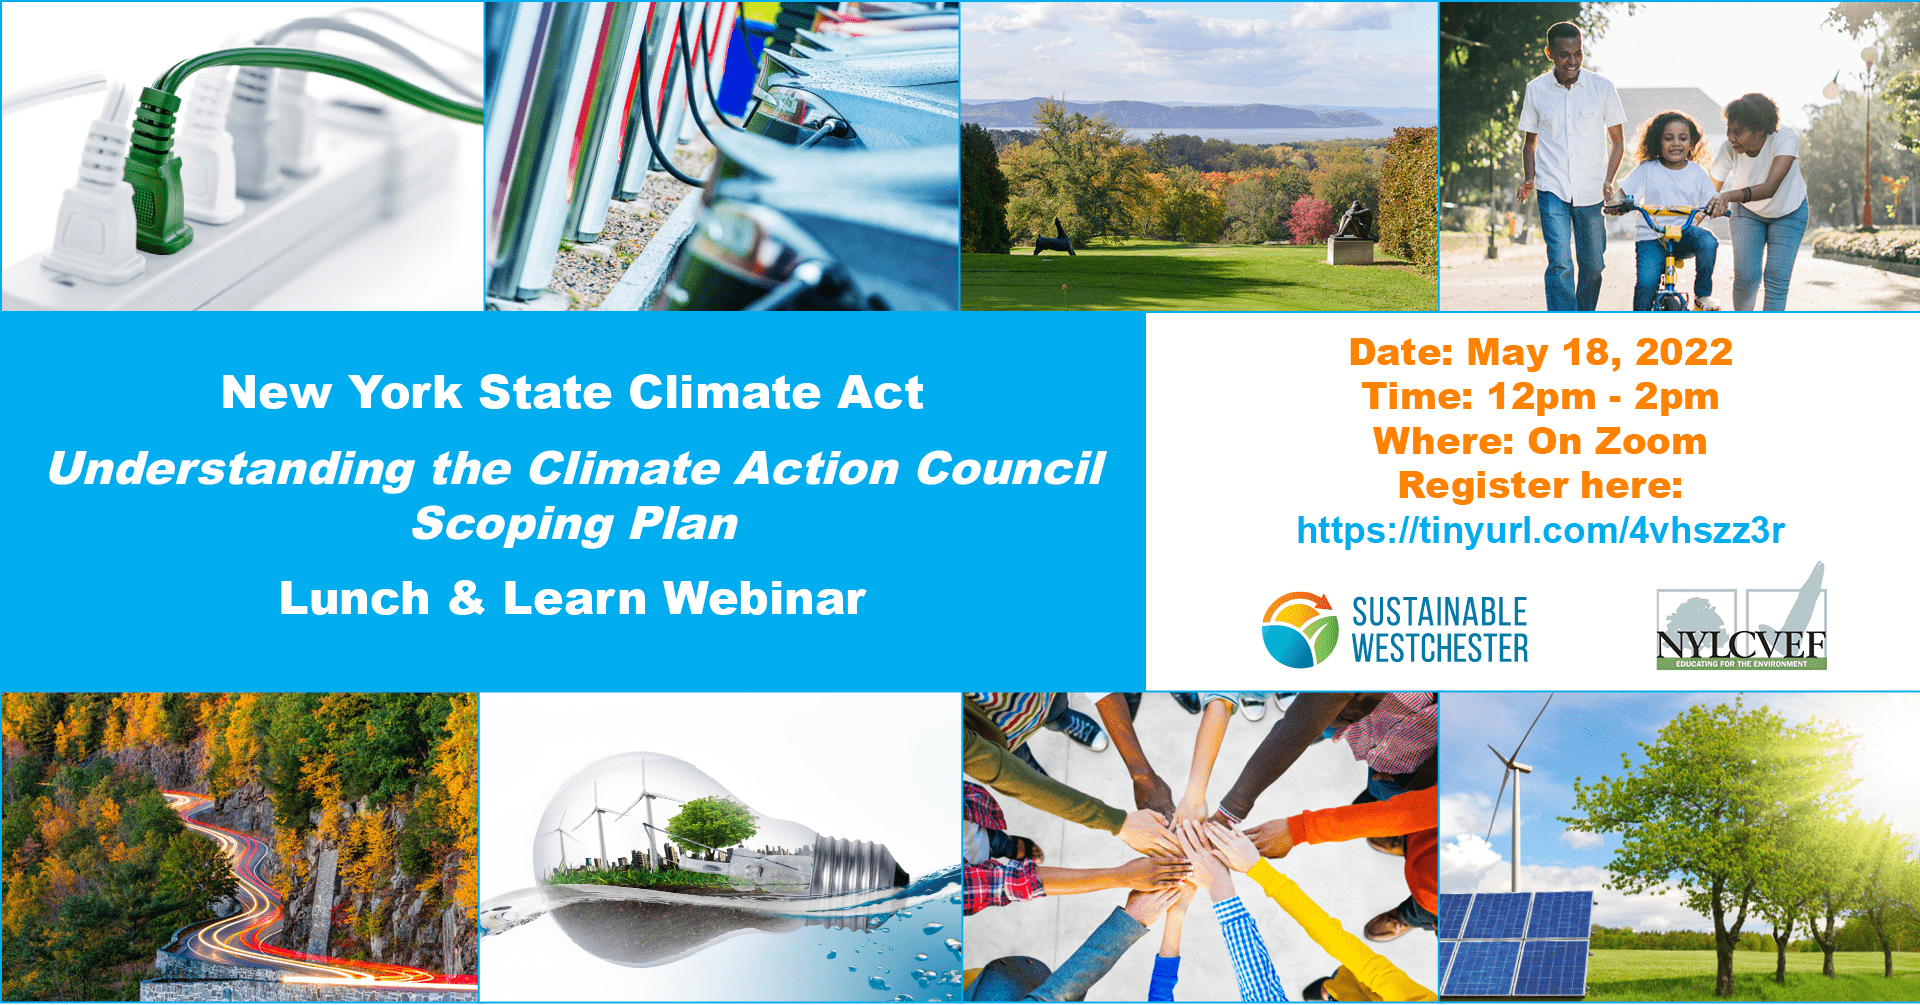 Join Sustainable Westchester and the NYLeague of Conservation Voters for a lunch & learn webinar: “Understanding the CLCPA Climate Action Council Scoping Plan” – Wednesday 5/18, 12 -2 PM